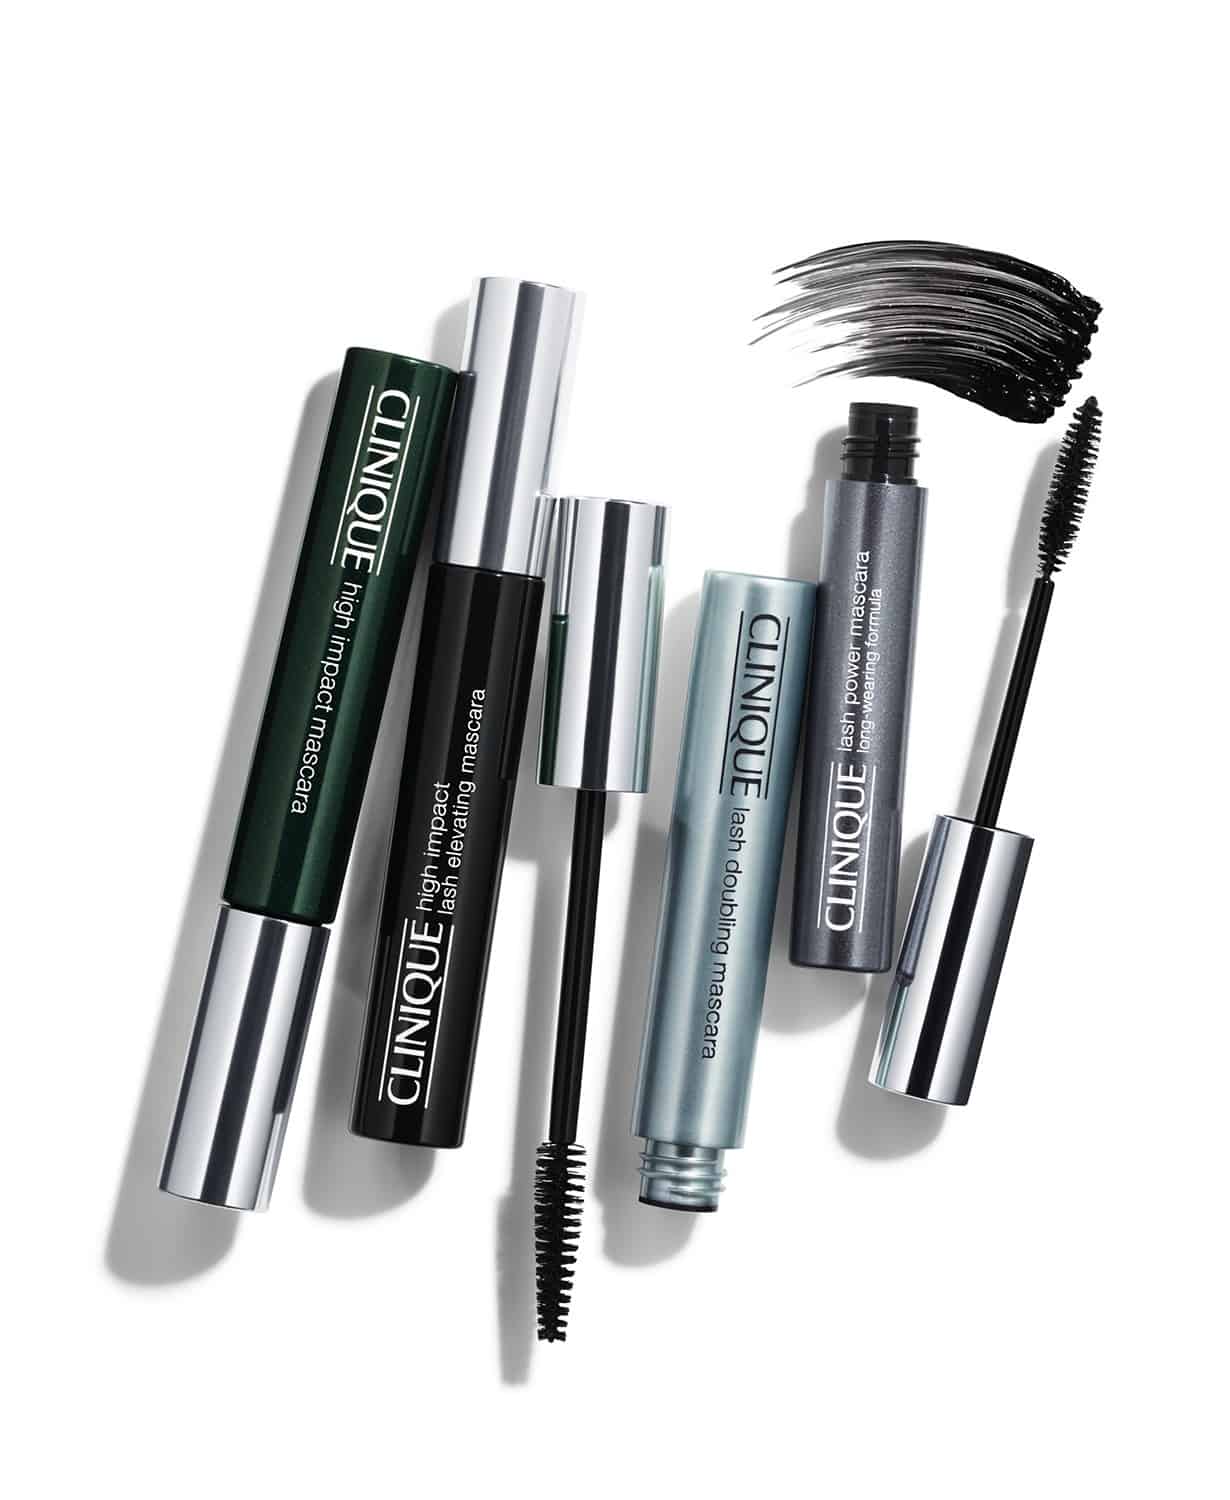 Clinique Mascara Sale Buy 2 Get 1 Free at Macy’s!